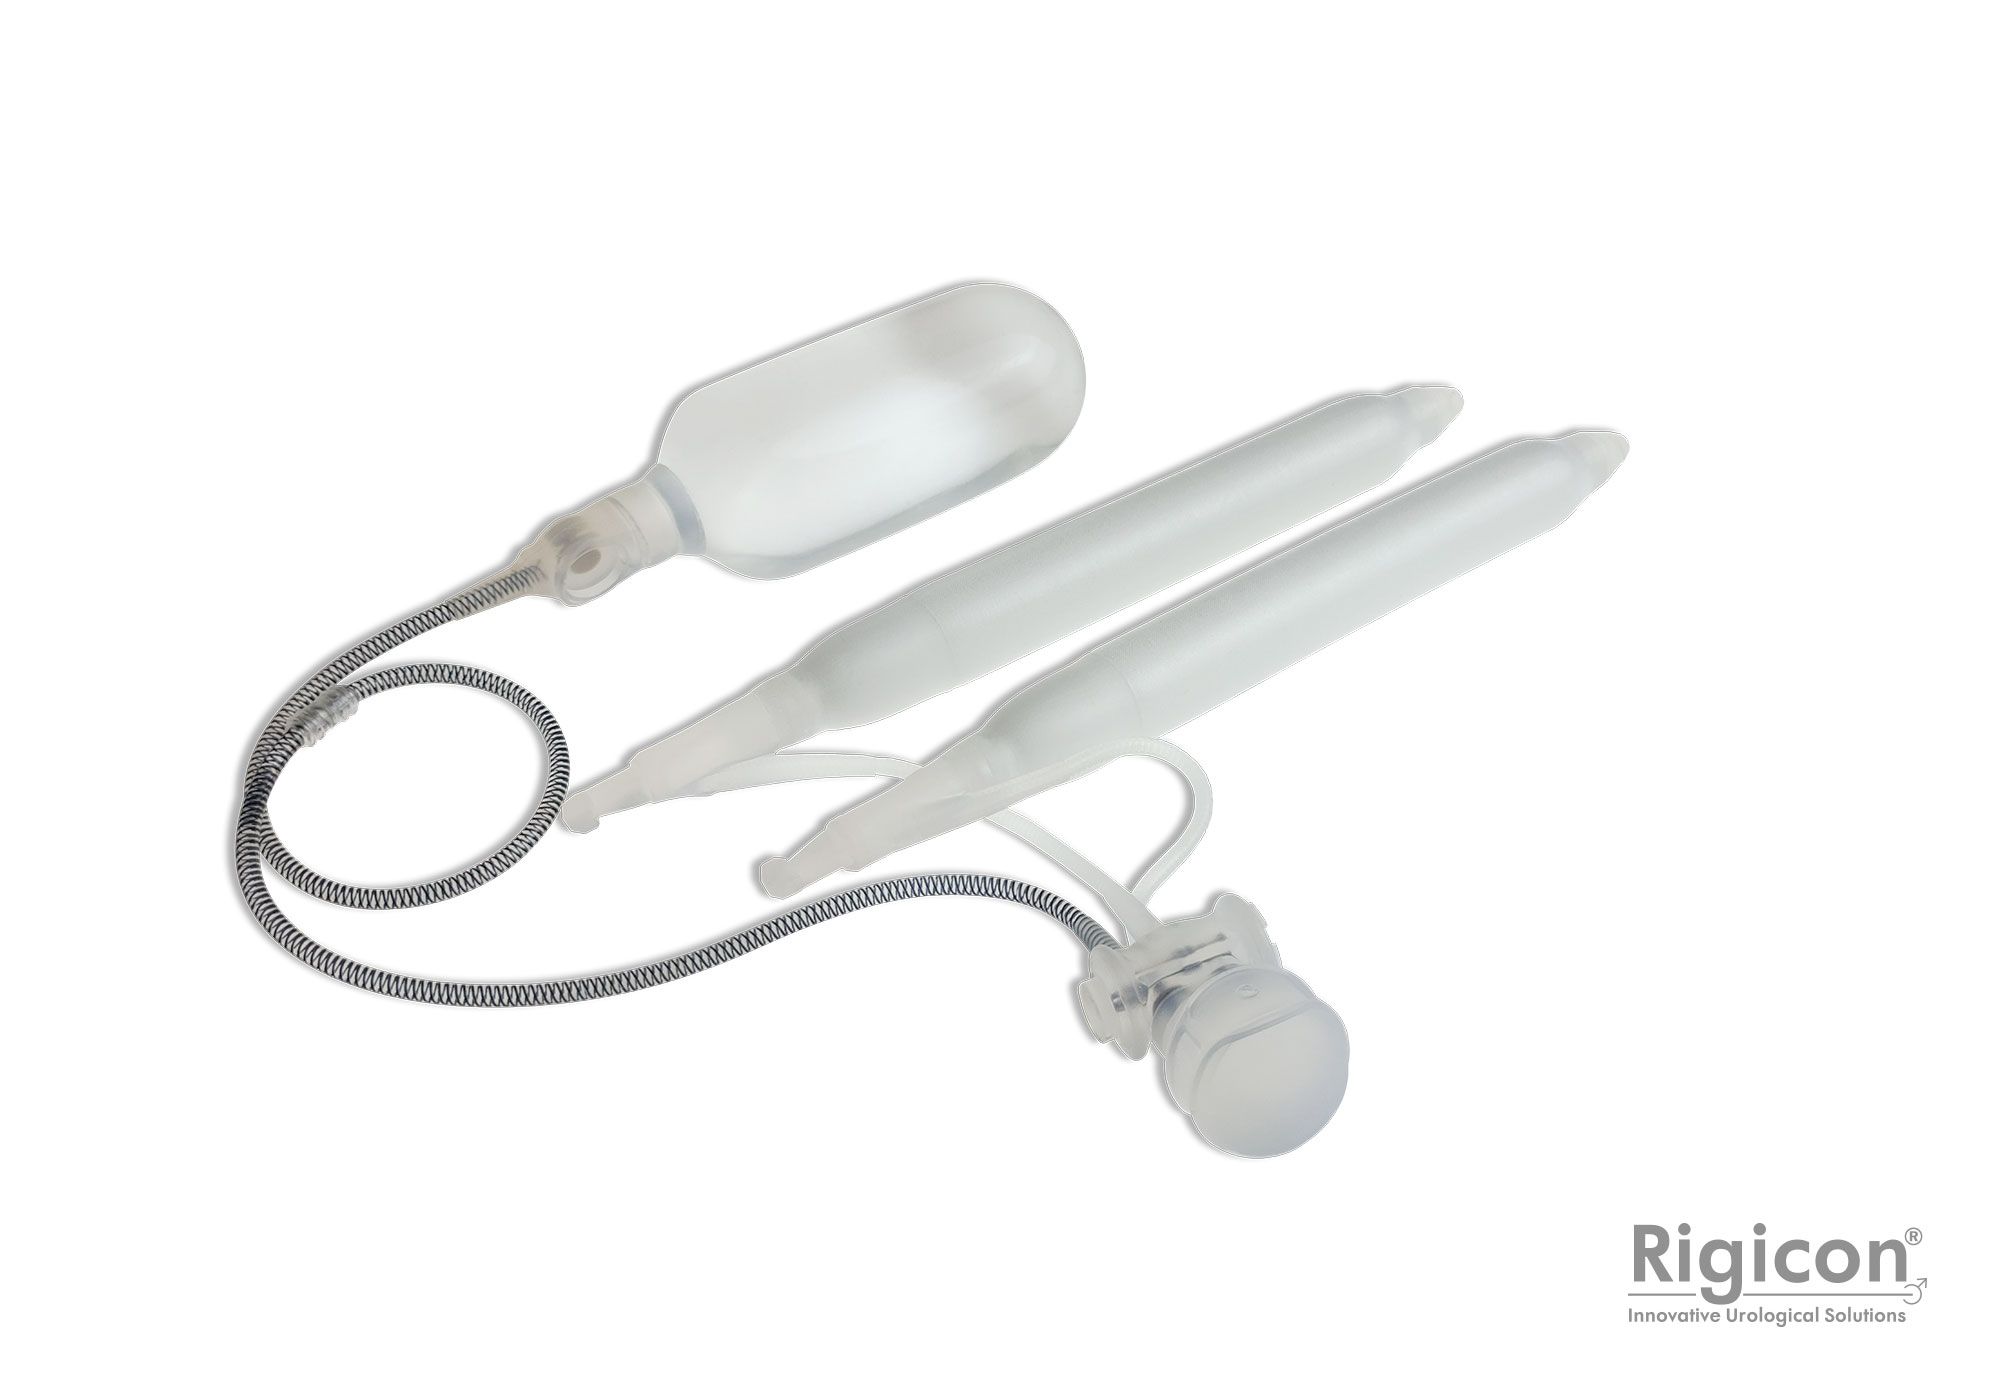 Infla10® X Inflatable Penile Prosthesis Penoscrotal Approach